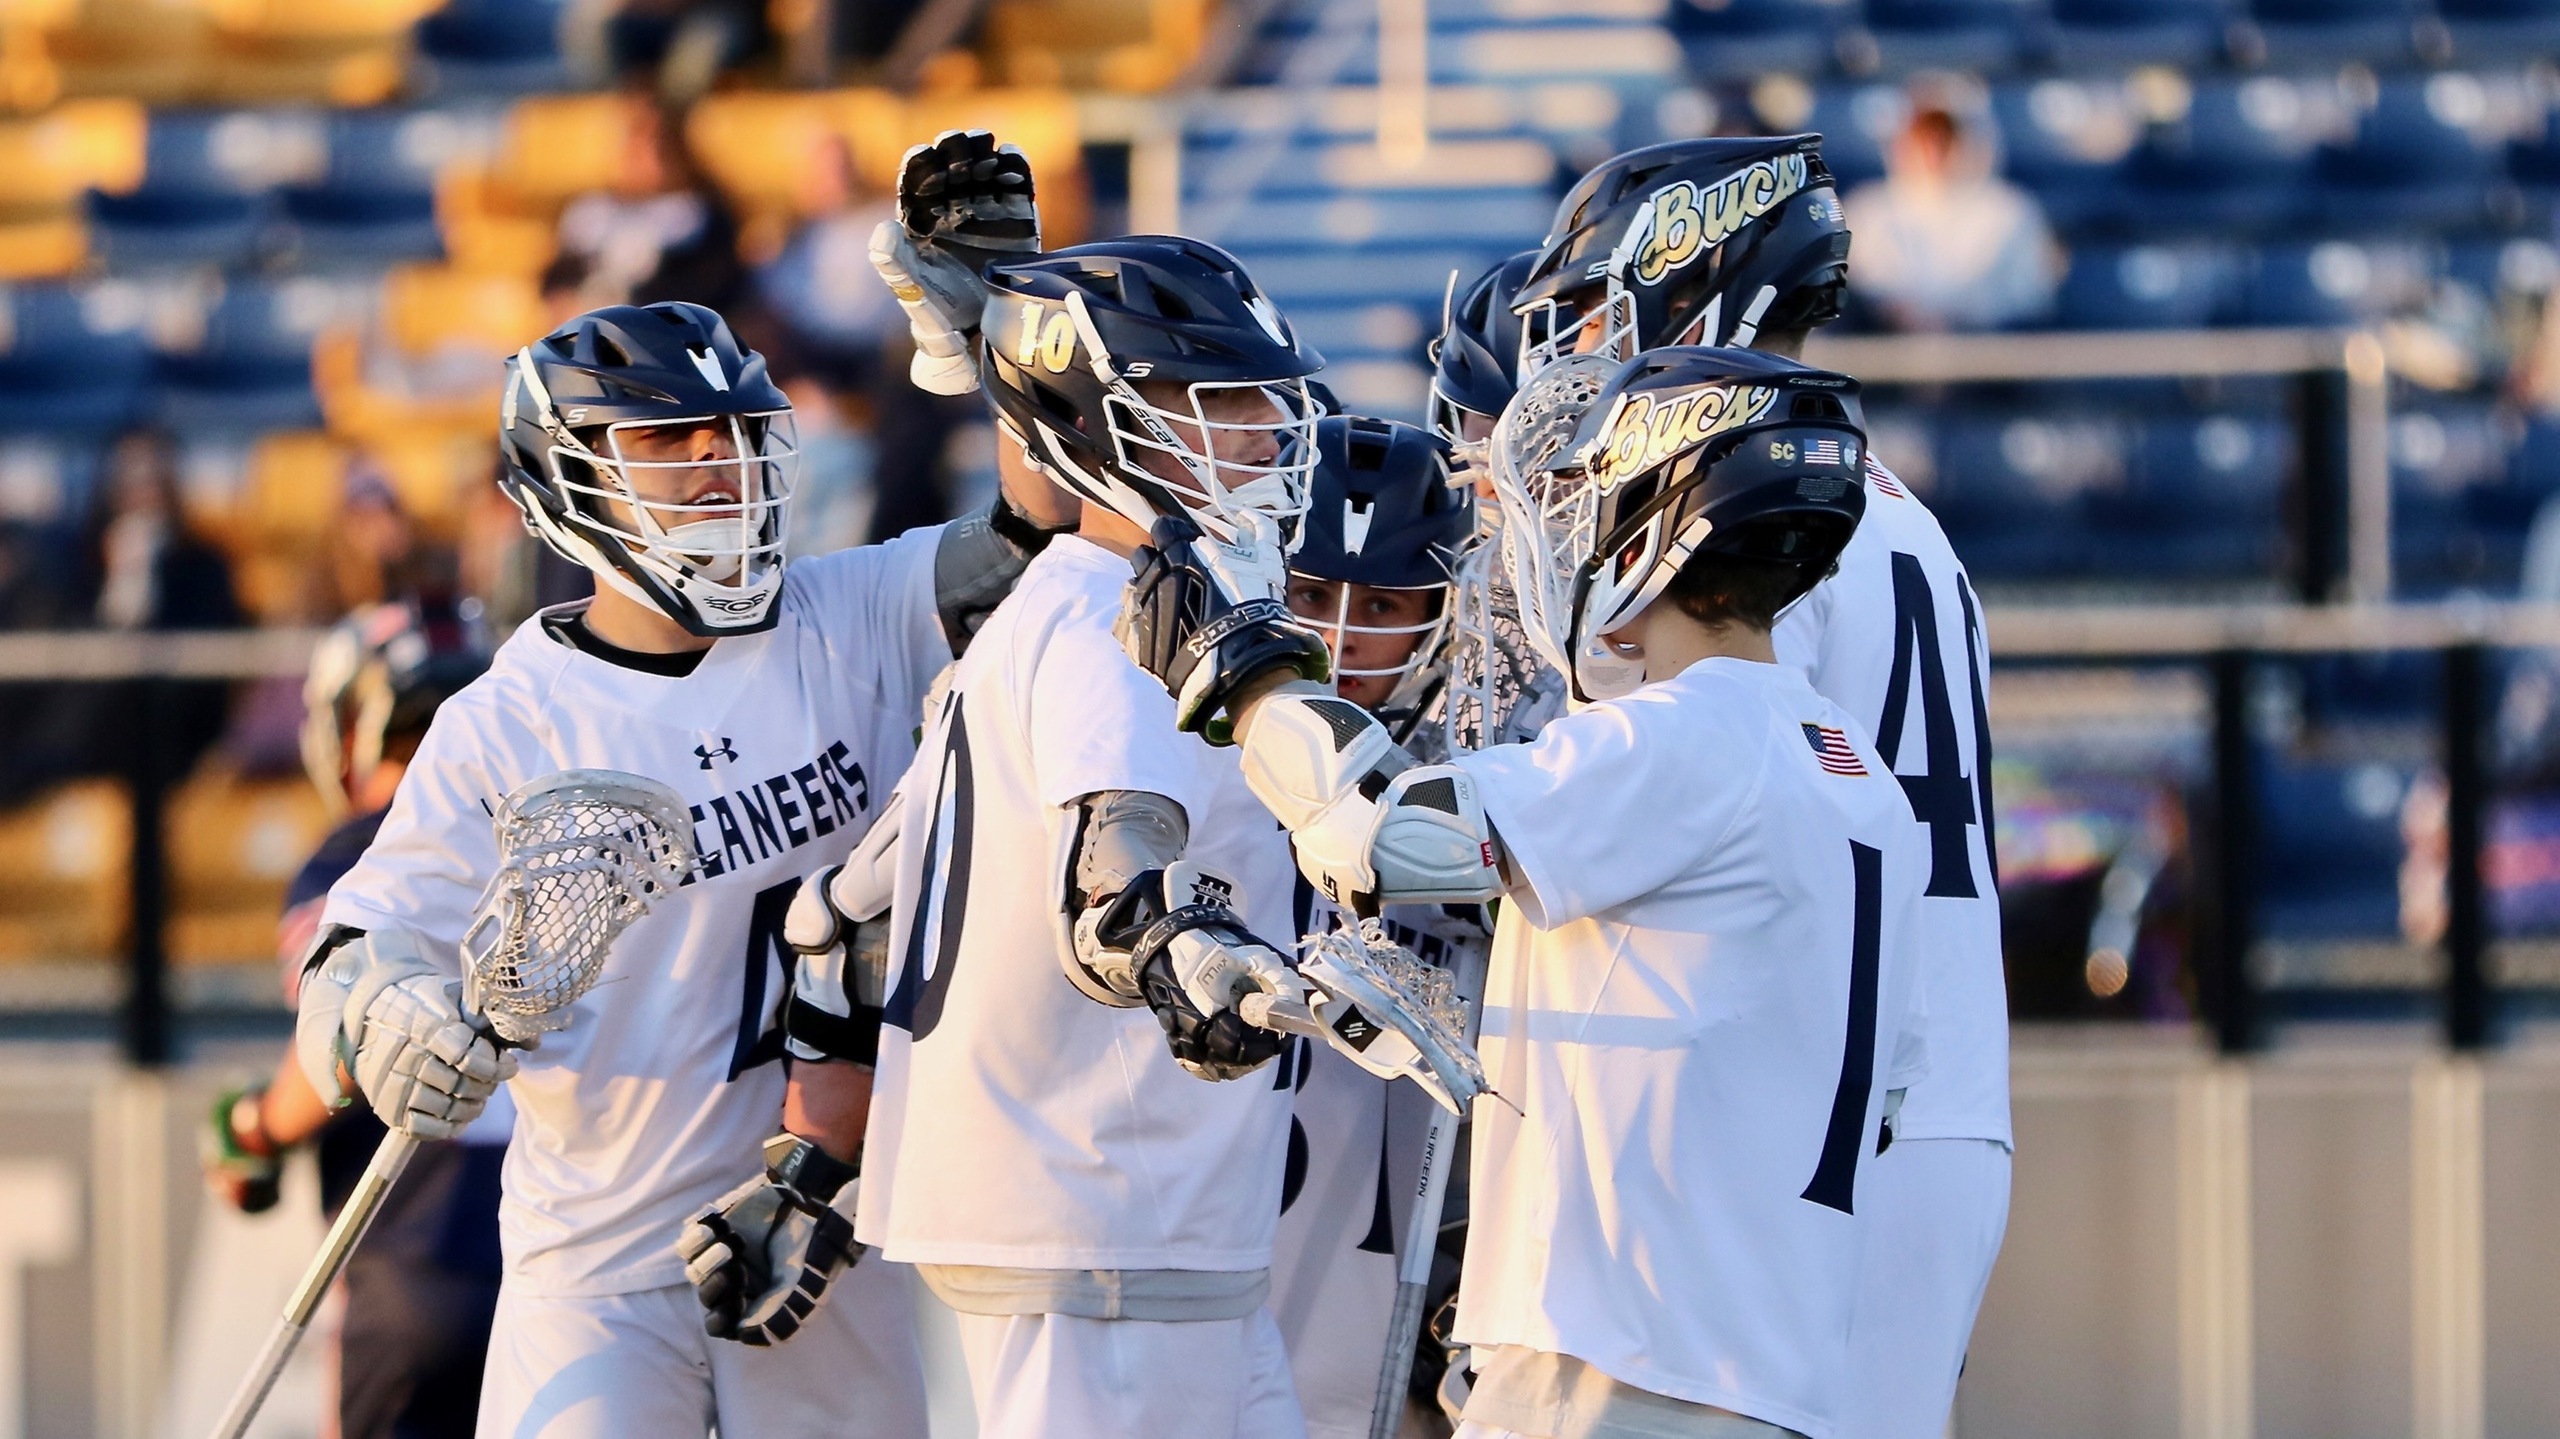 Men's Lacrosse: Buccaneers Defeat Warriors in Conference Play at Home